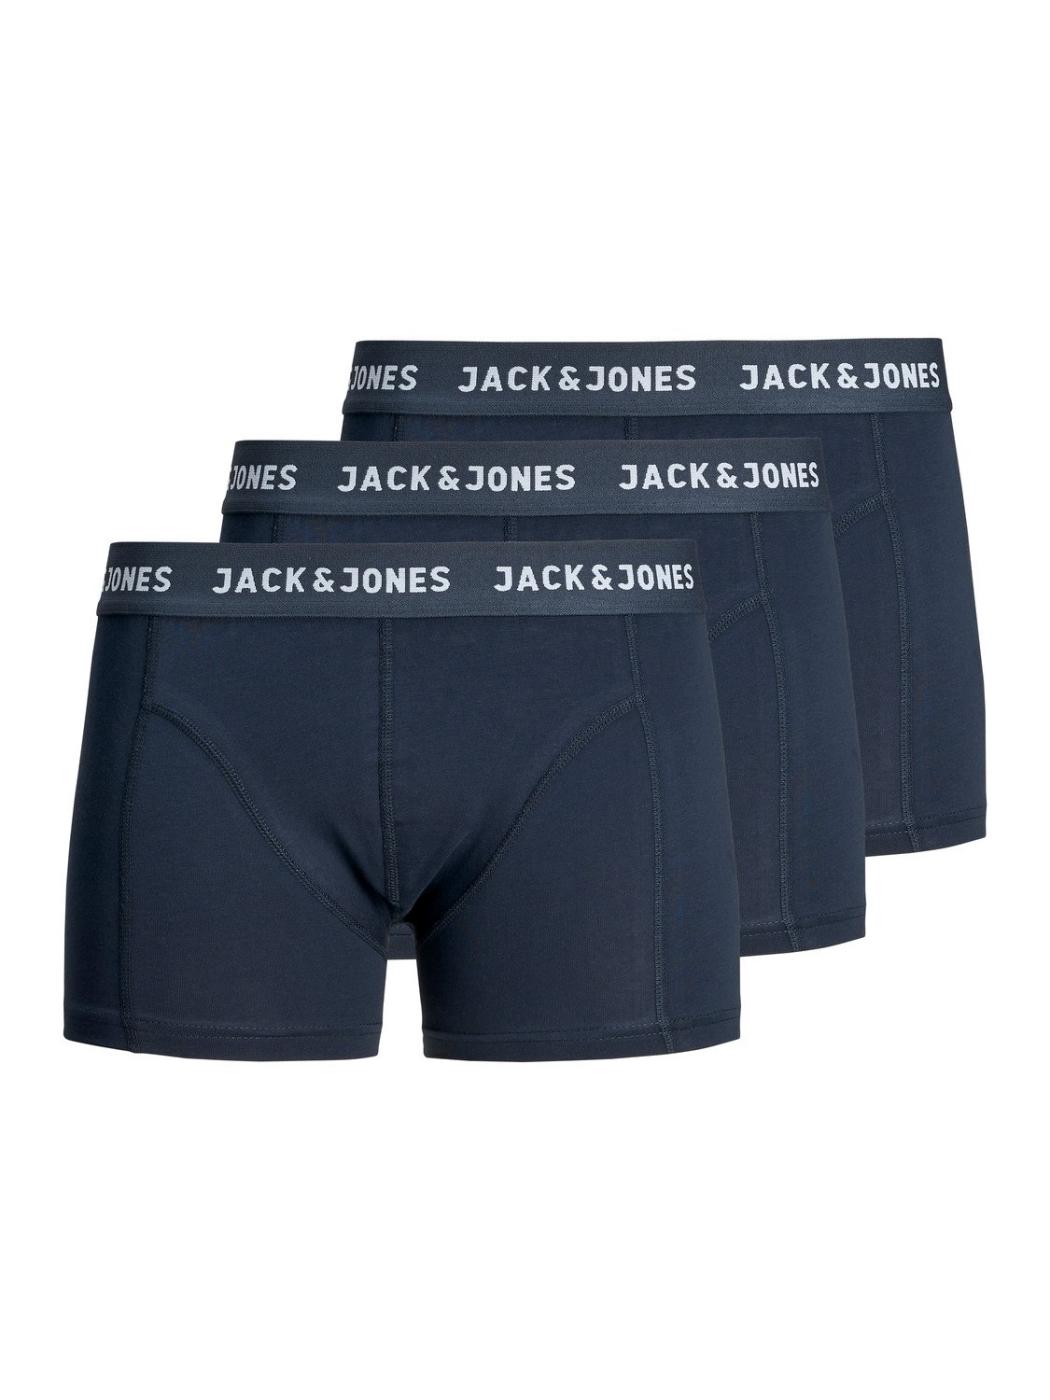 JACANTHONY TRUNKS 3 PACK BLUE - X